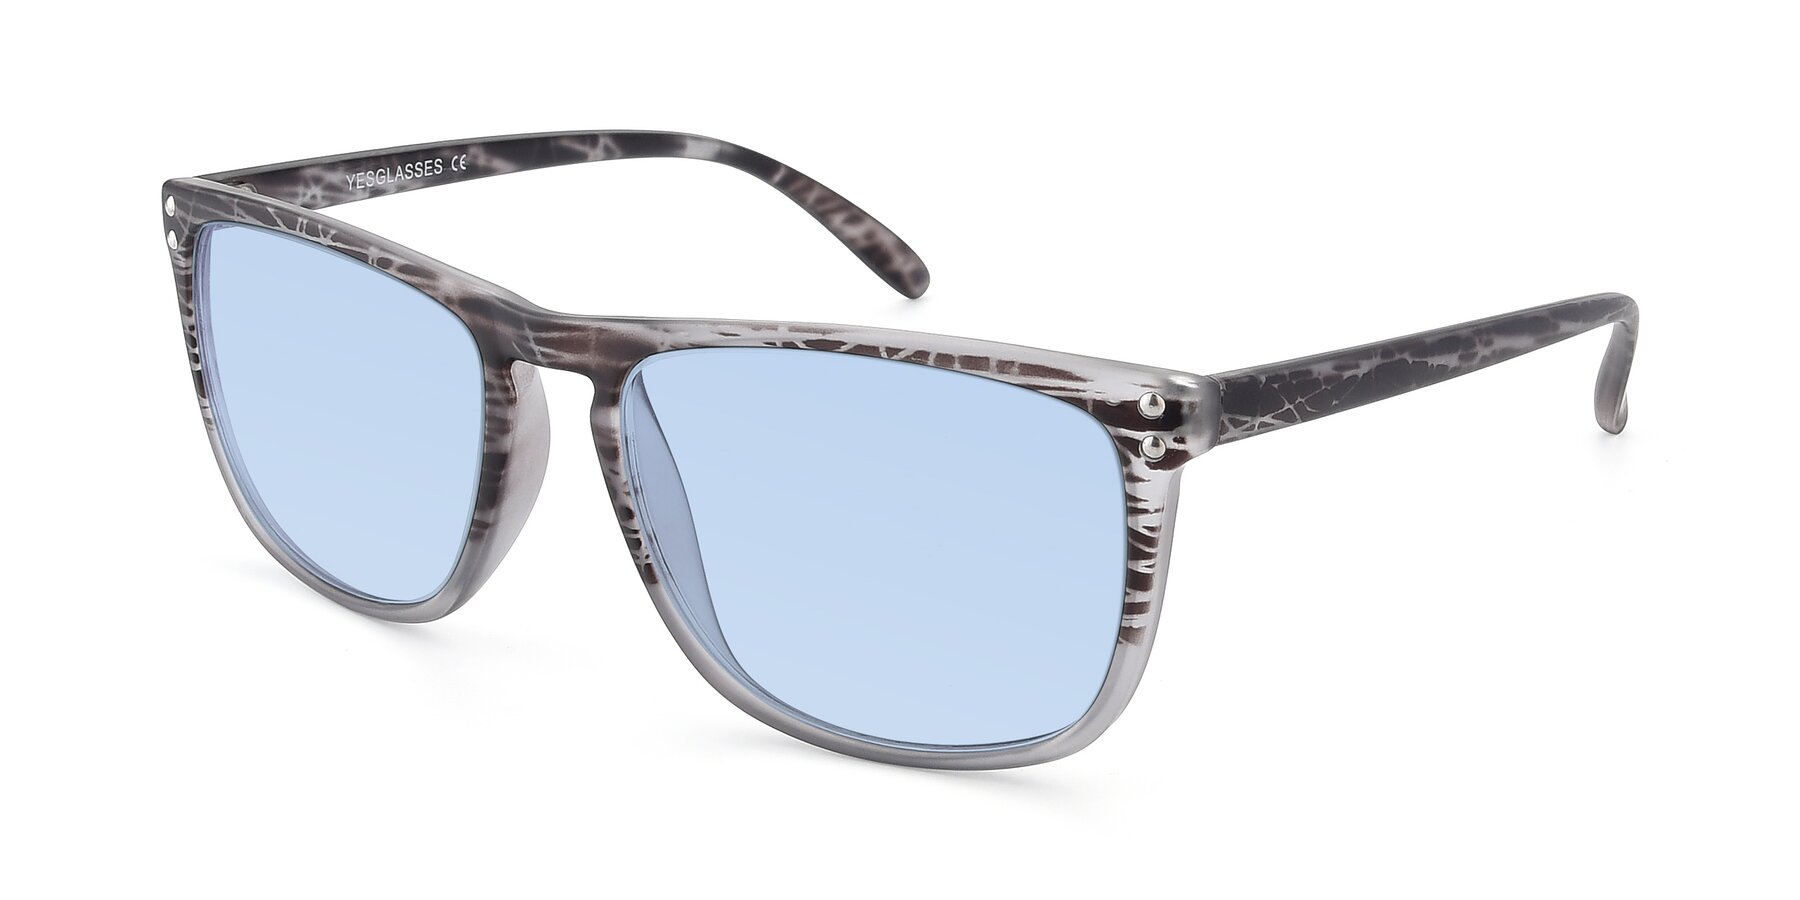 Angle of SSR411 in Translucent Floral Grey with Light Blue Tinted Lenses